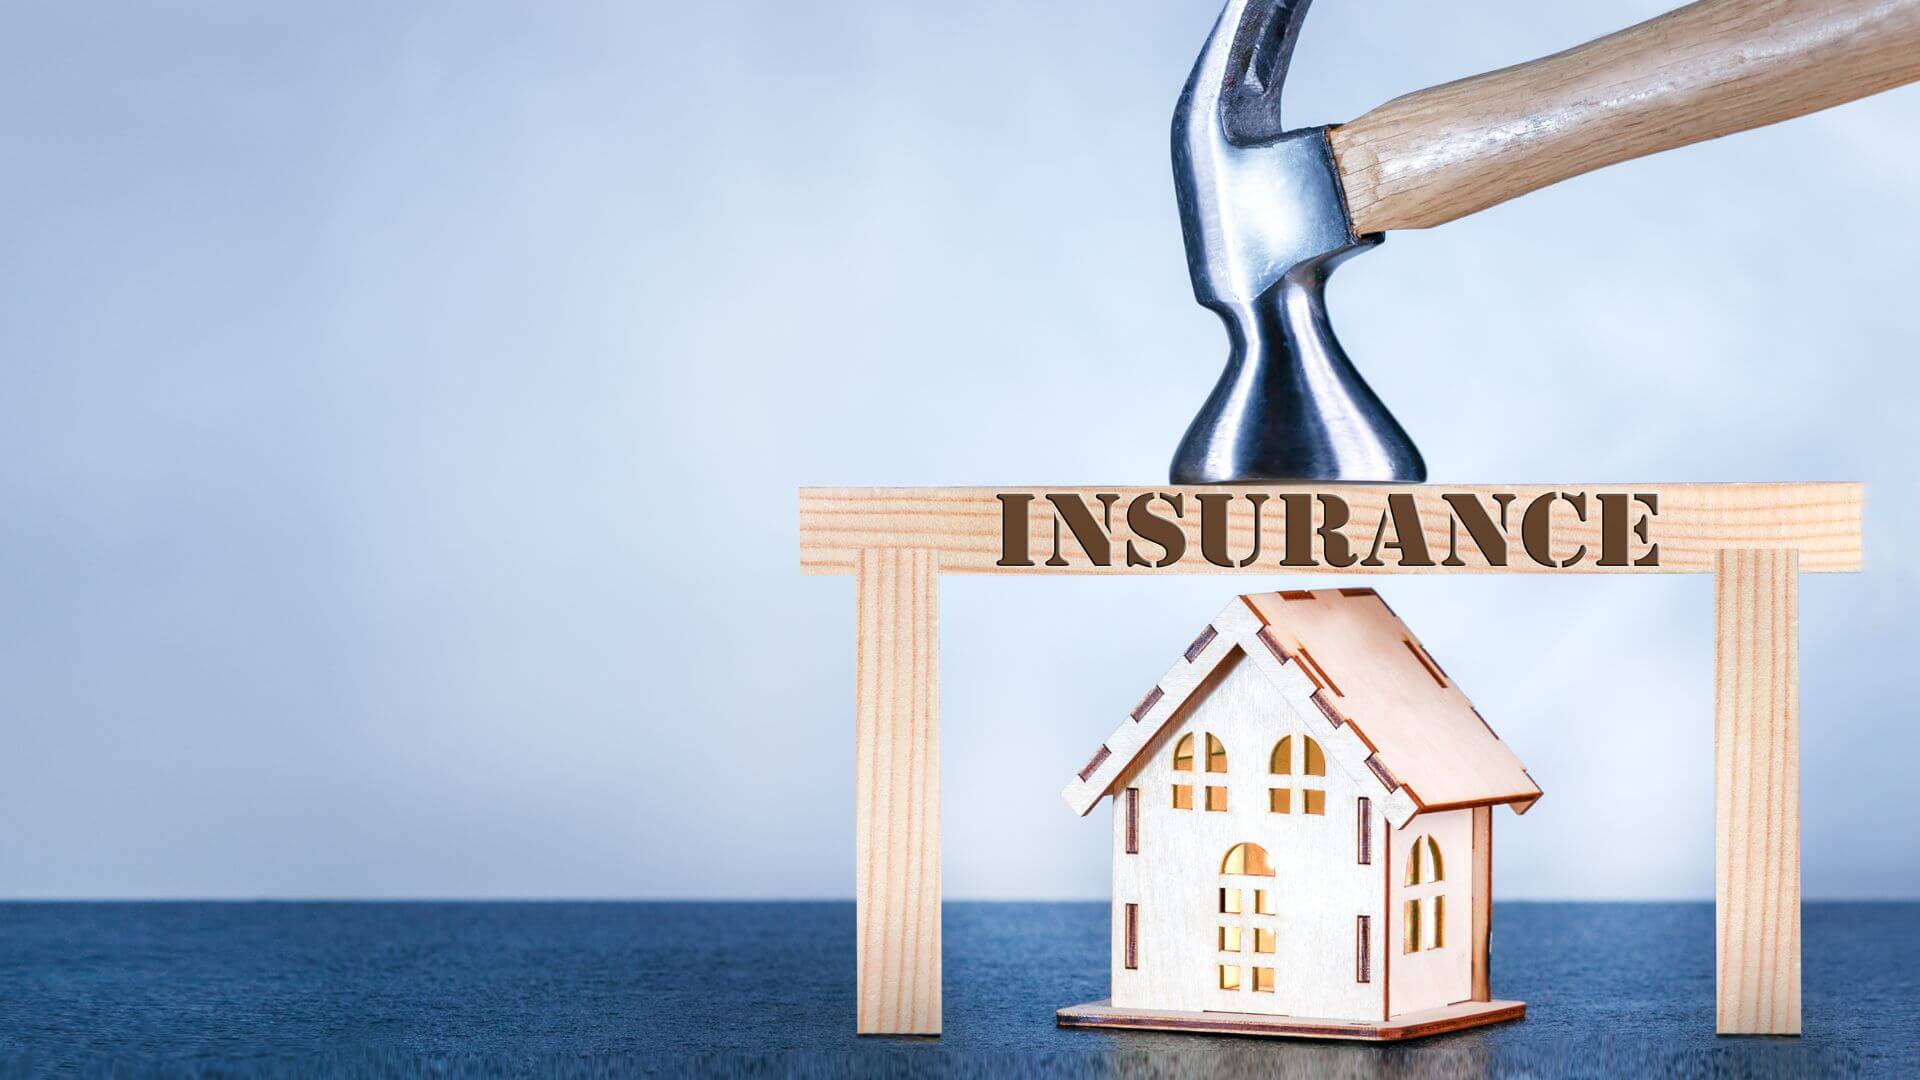 A wooden model of a house sits beneath a wooden block structure spelling out 'INSURANCE,' with a hammer positioned above as if to emphasize protection, set against a calm blue sea and sky background, illustrating the concept of landlord's insurance as a safeguard for property investment.